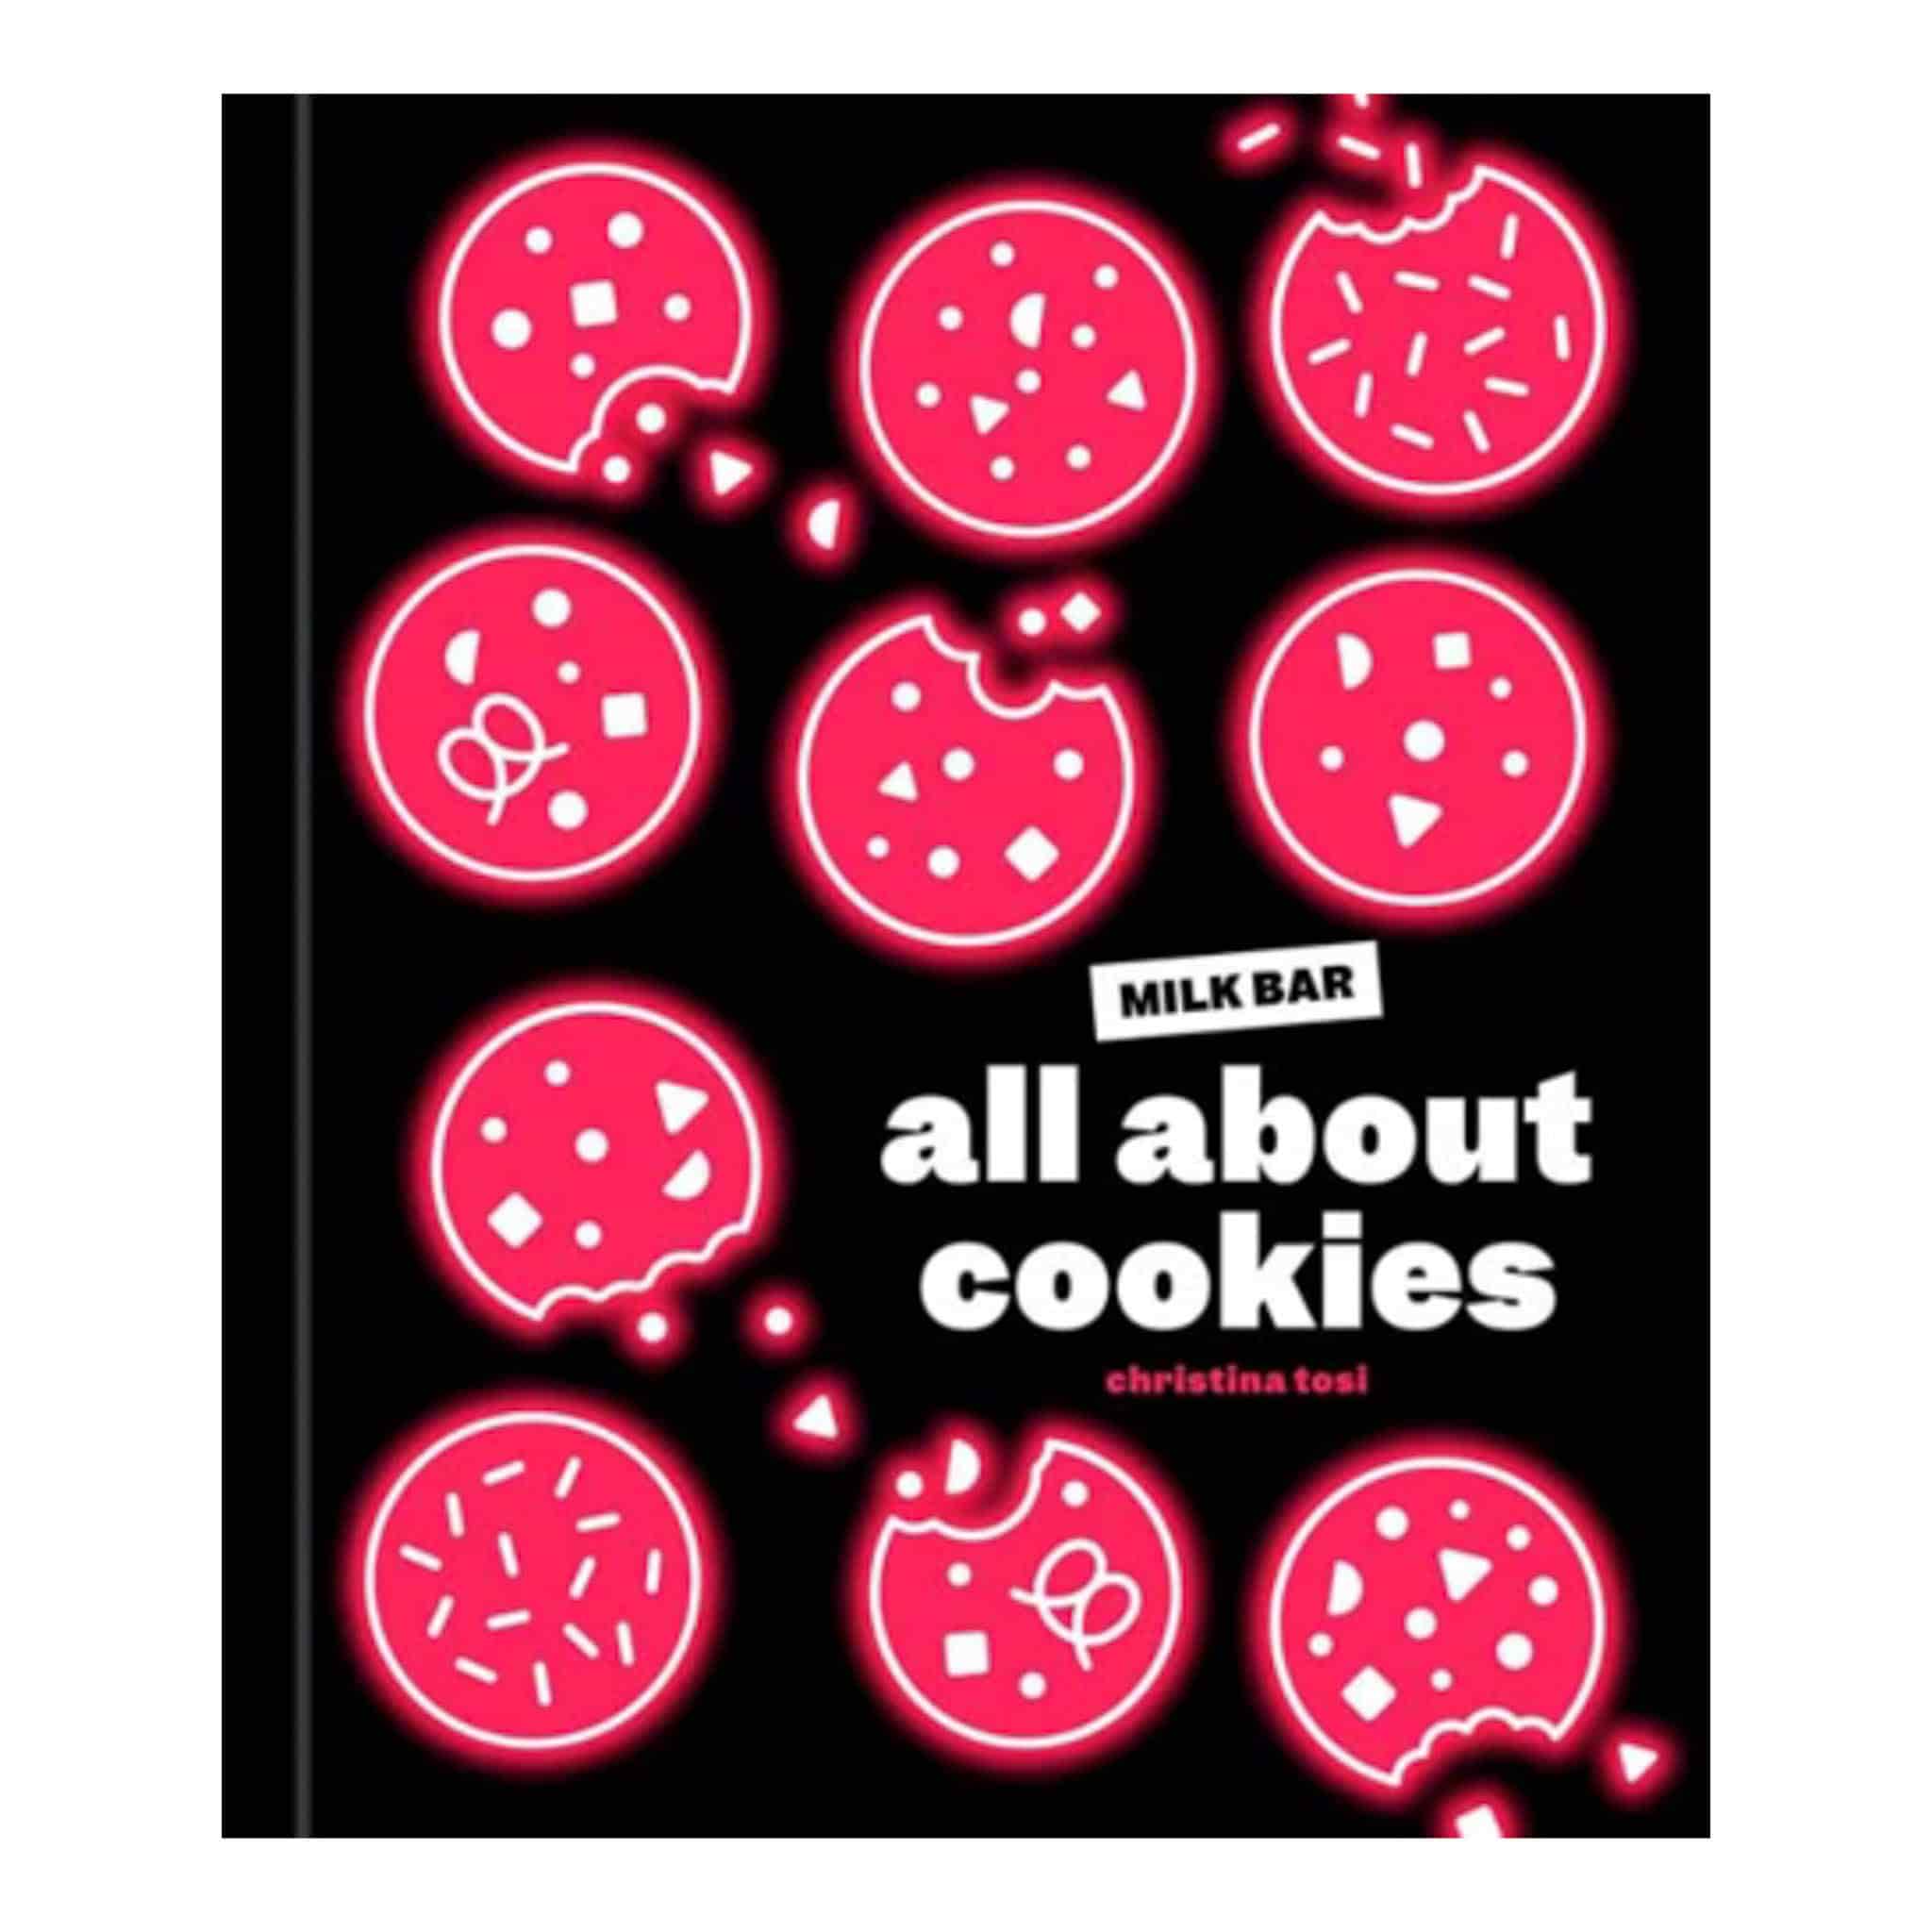 All About Cookies, by Christina Tosi